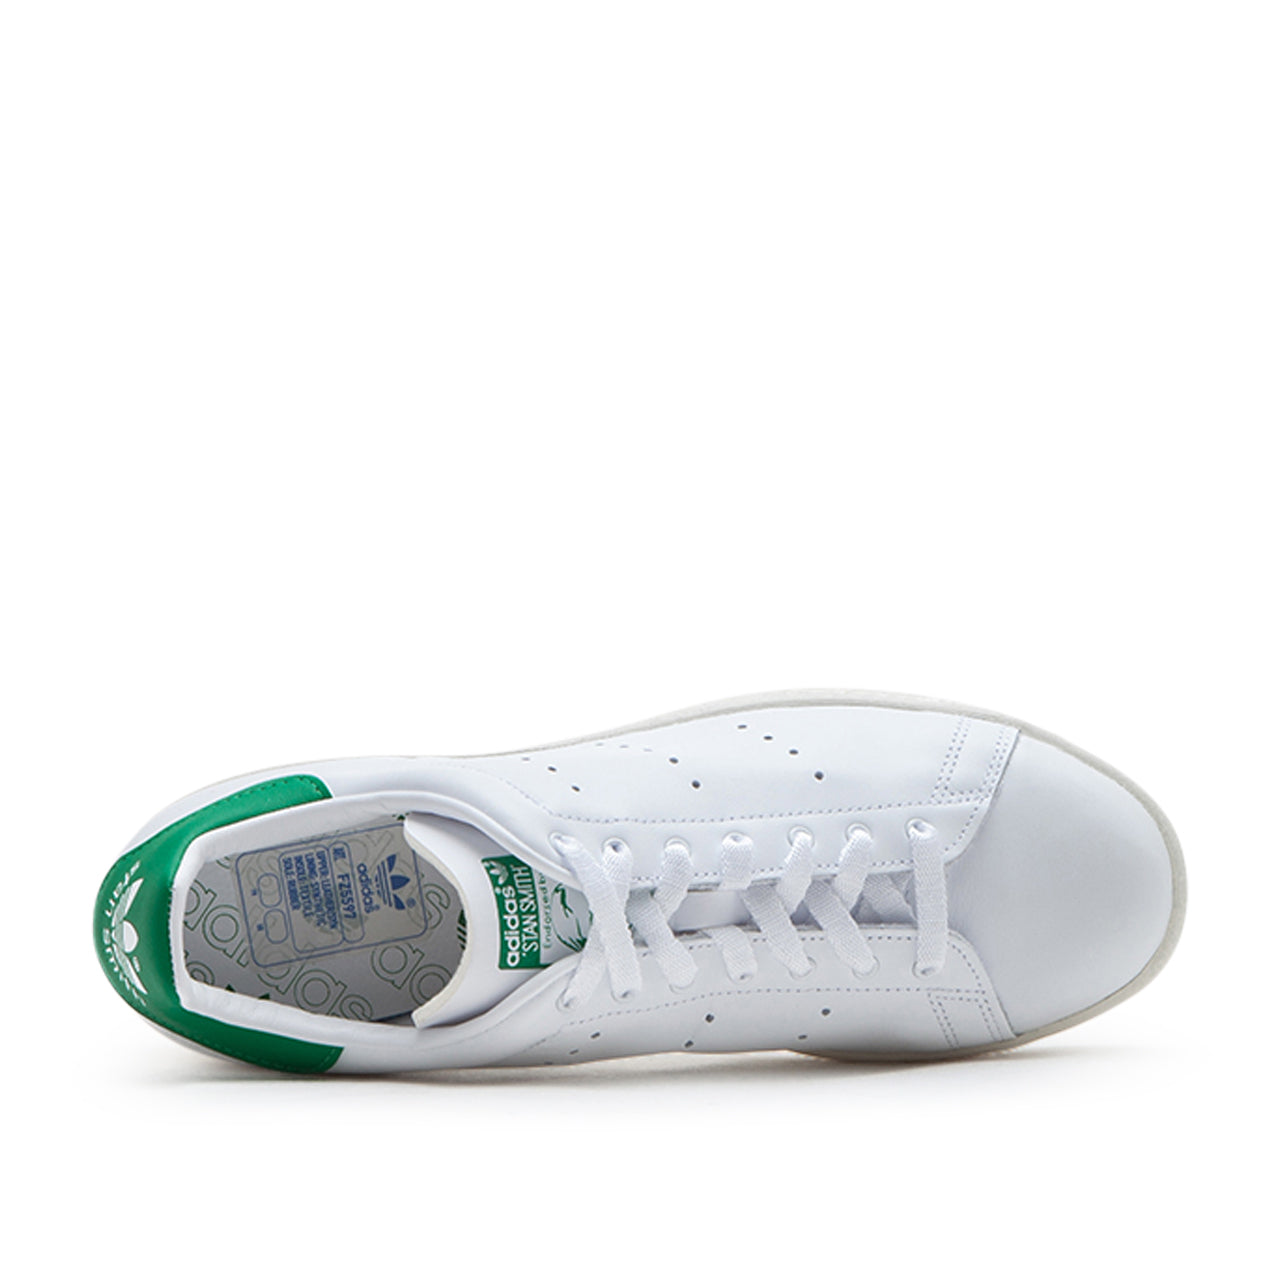 complicaties Afkorting Klooster adidas Stan Smith (White / Green) FZ5597 – Allike Store